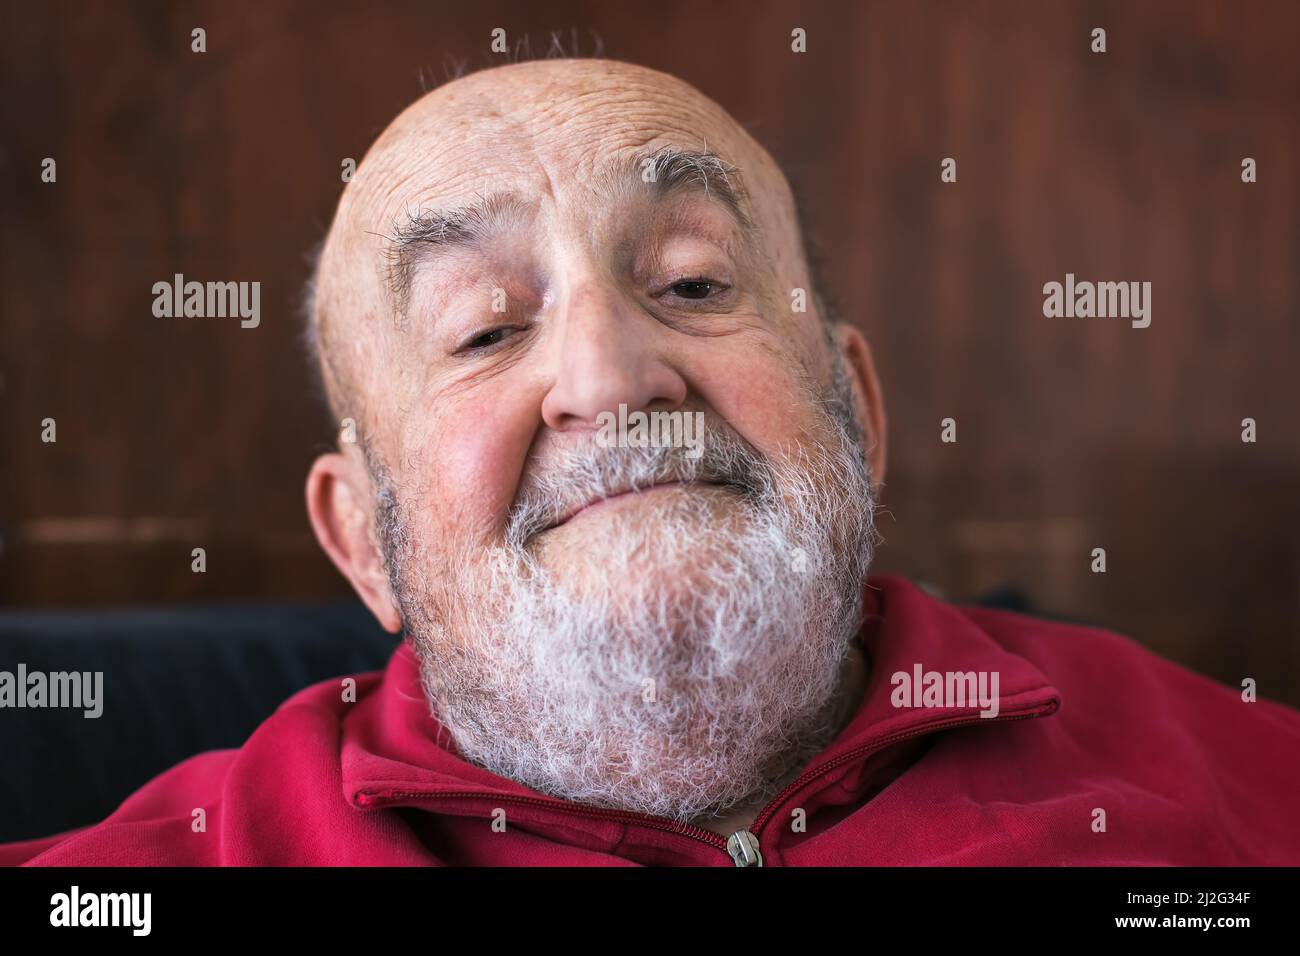 portrait of content funny old man Stock Photo